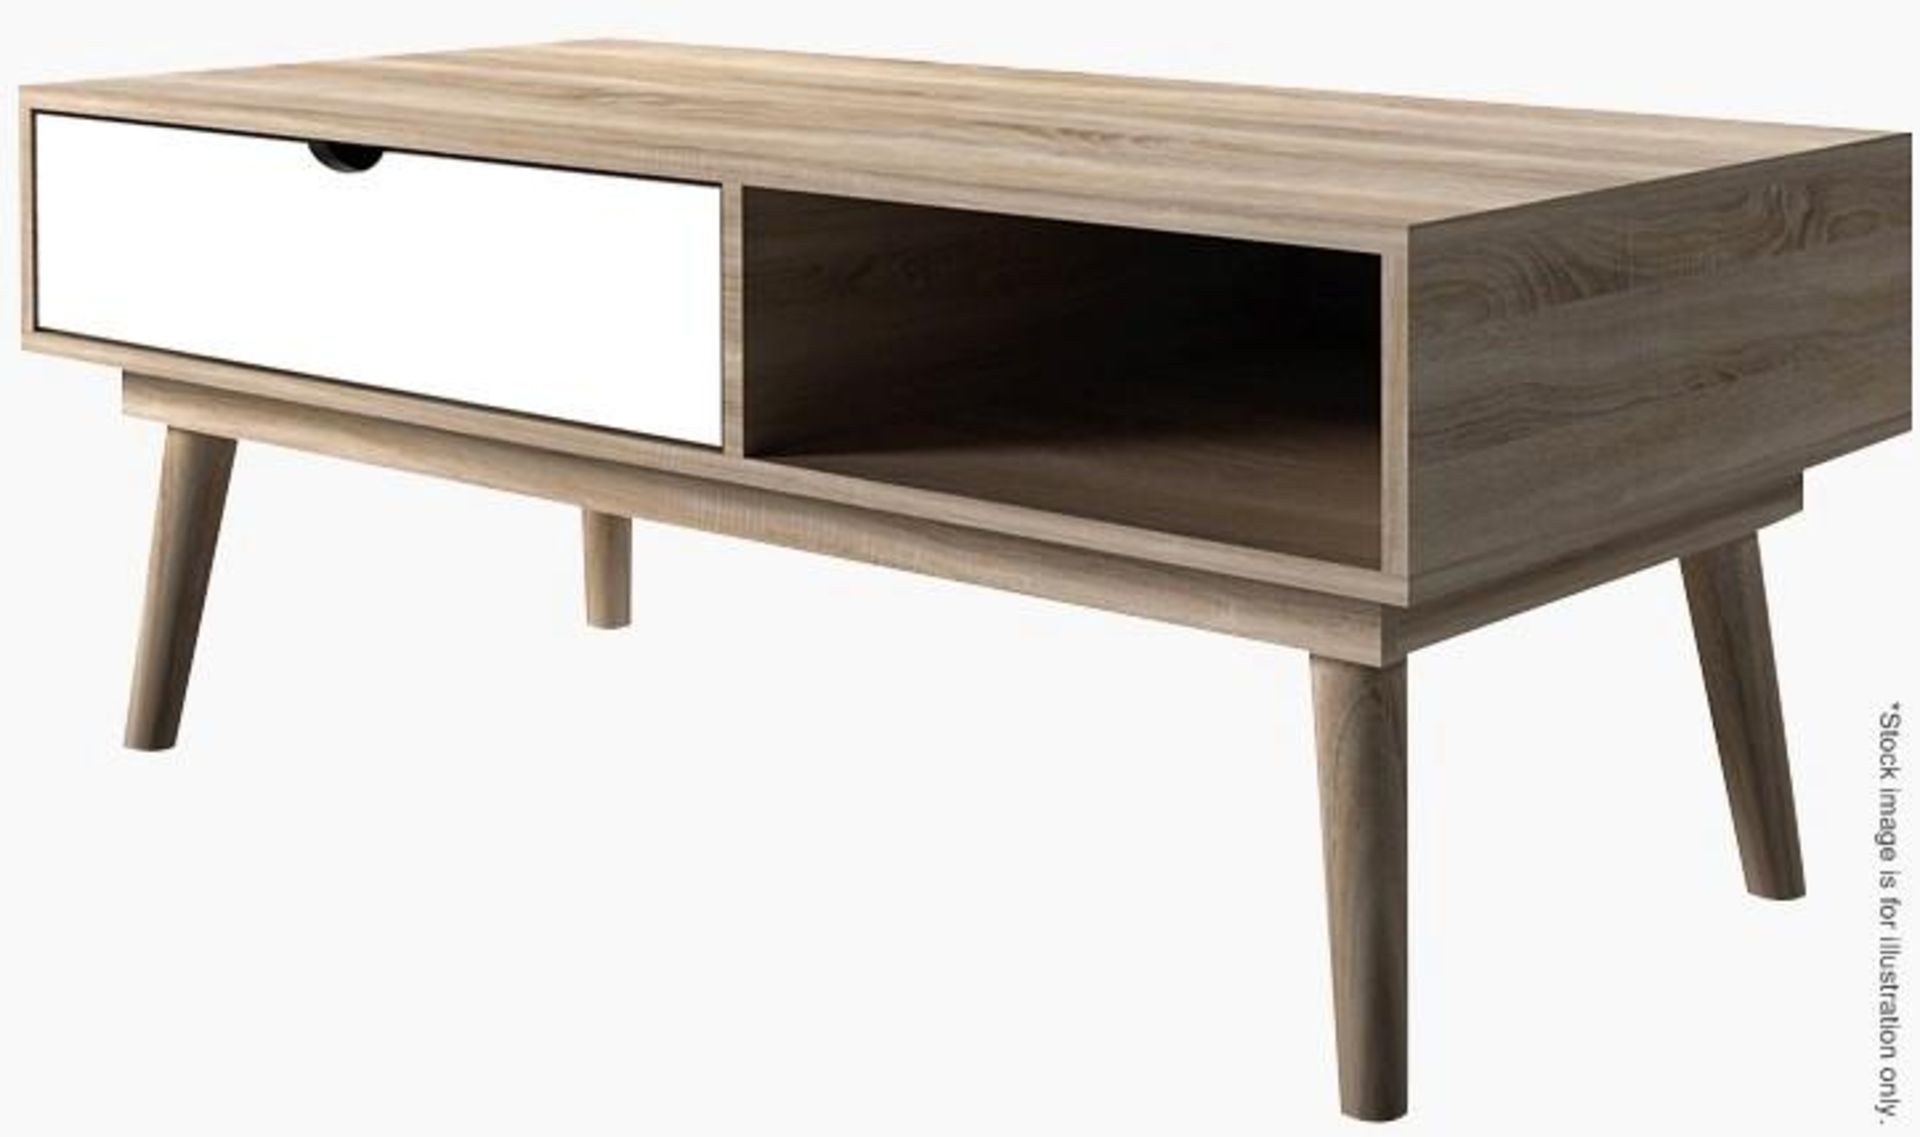 1 Retro Scandinavian-Style Coffee Table With Drawer - Dimensions: L 120cm x W 60cm x H 49.6cm - Bran - Image 2 of 3